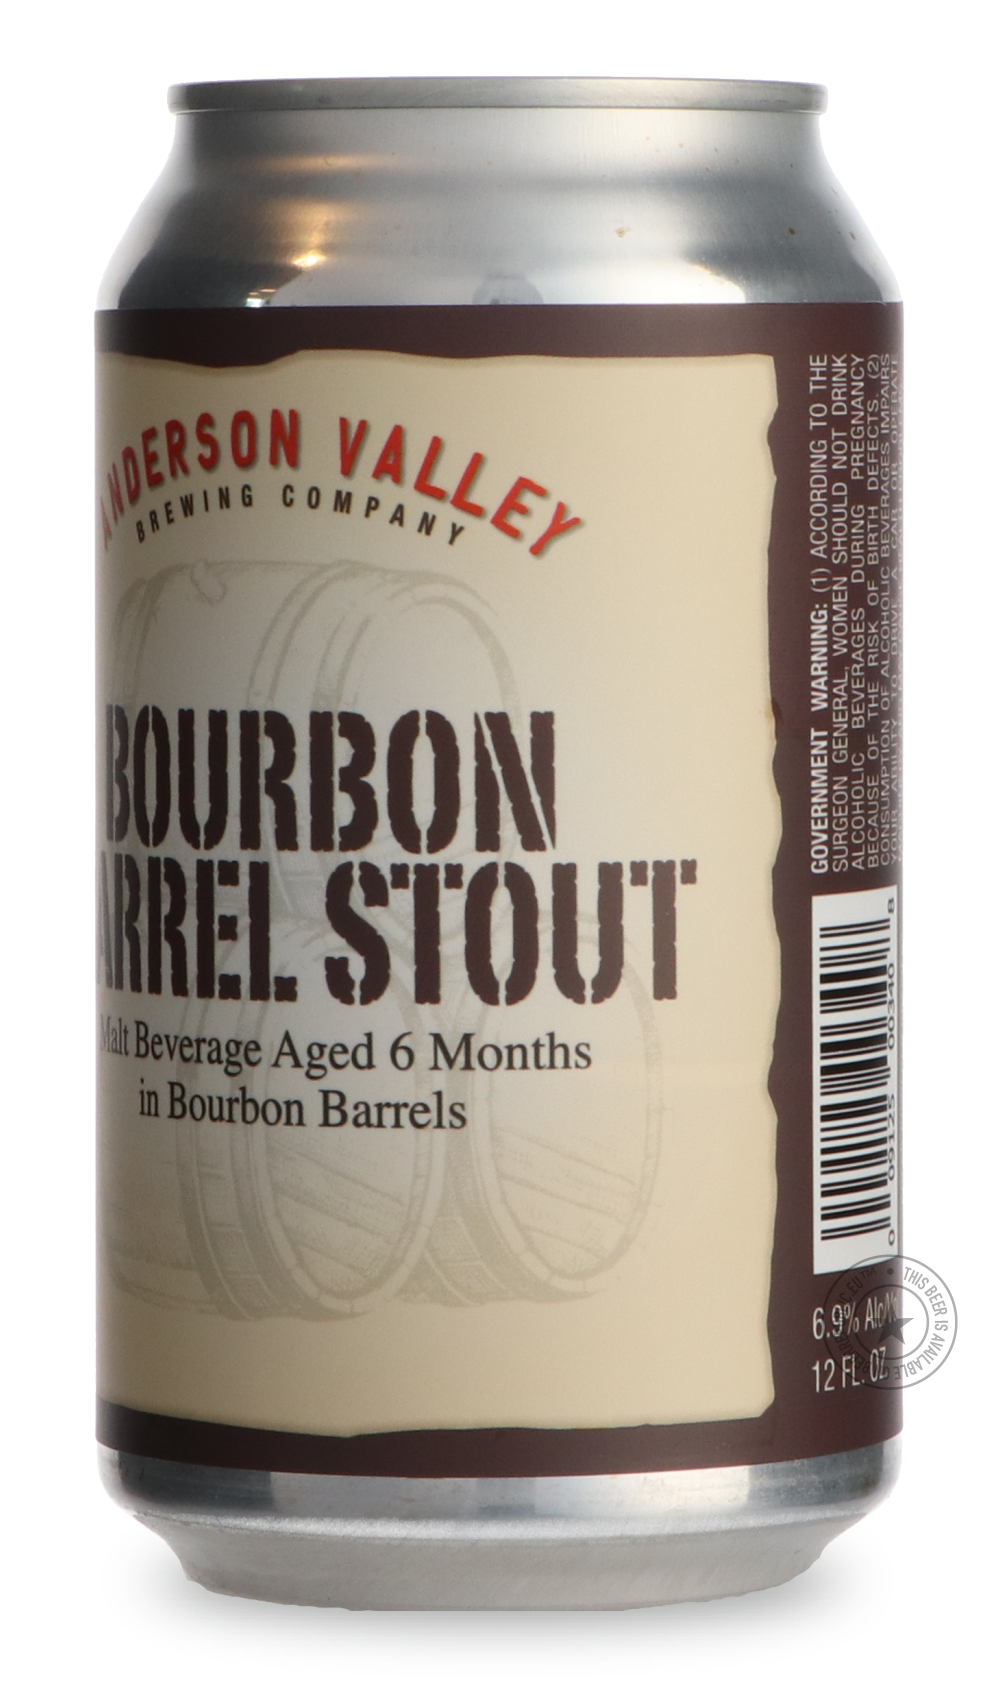 -Anderson Valley- Bourbon Barrel Stout-Stout & Porter- Only @ Beer Republic - The best online beer store for American & Canadian craft beer - Buy beer online from the USA and Canada - Bier online kopen - Amerikaans bier kopen - Craft beer store - Craft beer kopen - Amerikanisch bier kaufen - Bier online kaufen - Acheter biere online - IPA - Stout - Porter - New England IPA - Hazy IPA - Imperial Stout - Barrel Aged - Barrel Aged Imperial Stout - Brown - Dark beer - Blond - Blonde - Pilsner - Lager - Wheat - 